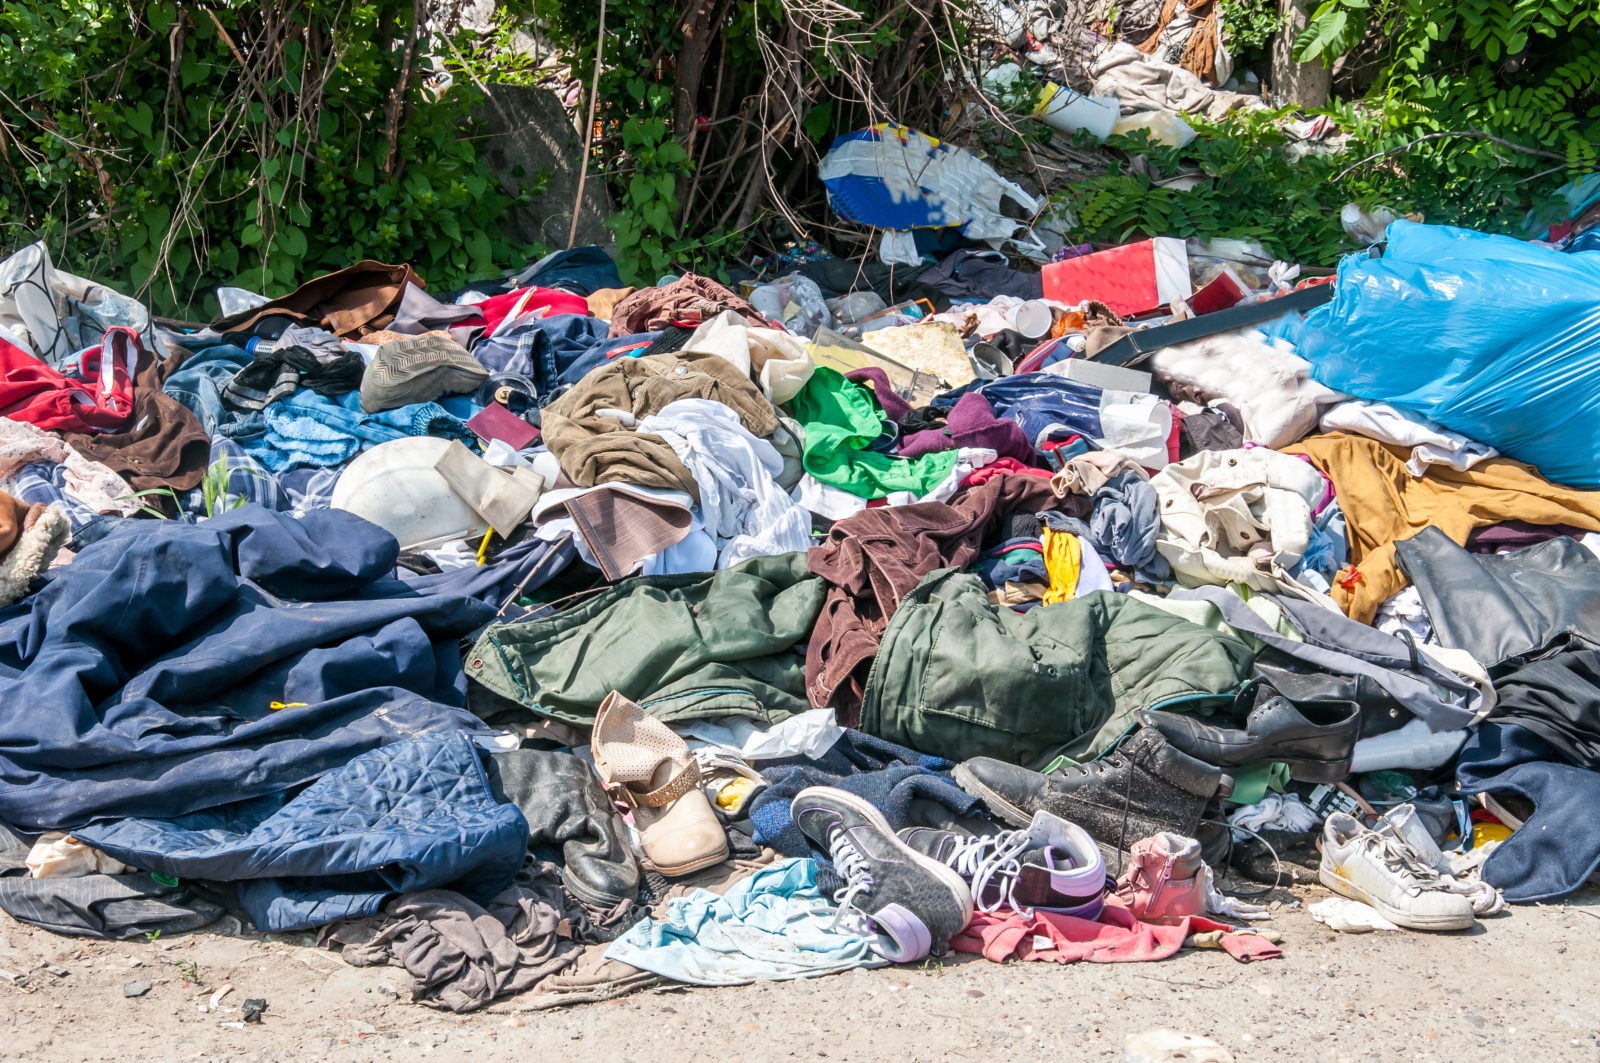 Pile of old clothes and shoes dumped on the grass as junk and garbage, littering and polluting the environment